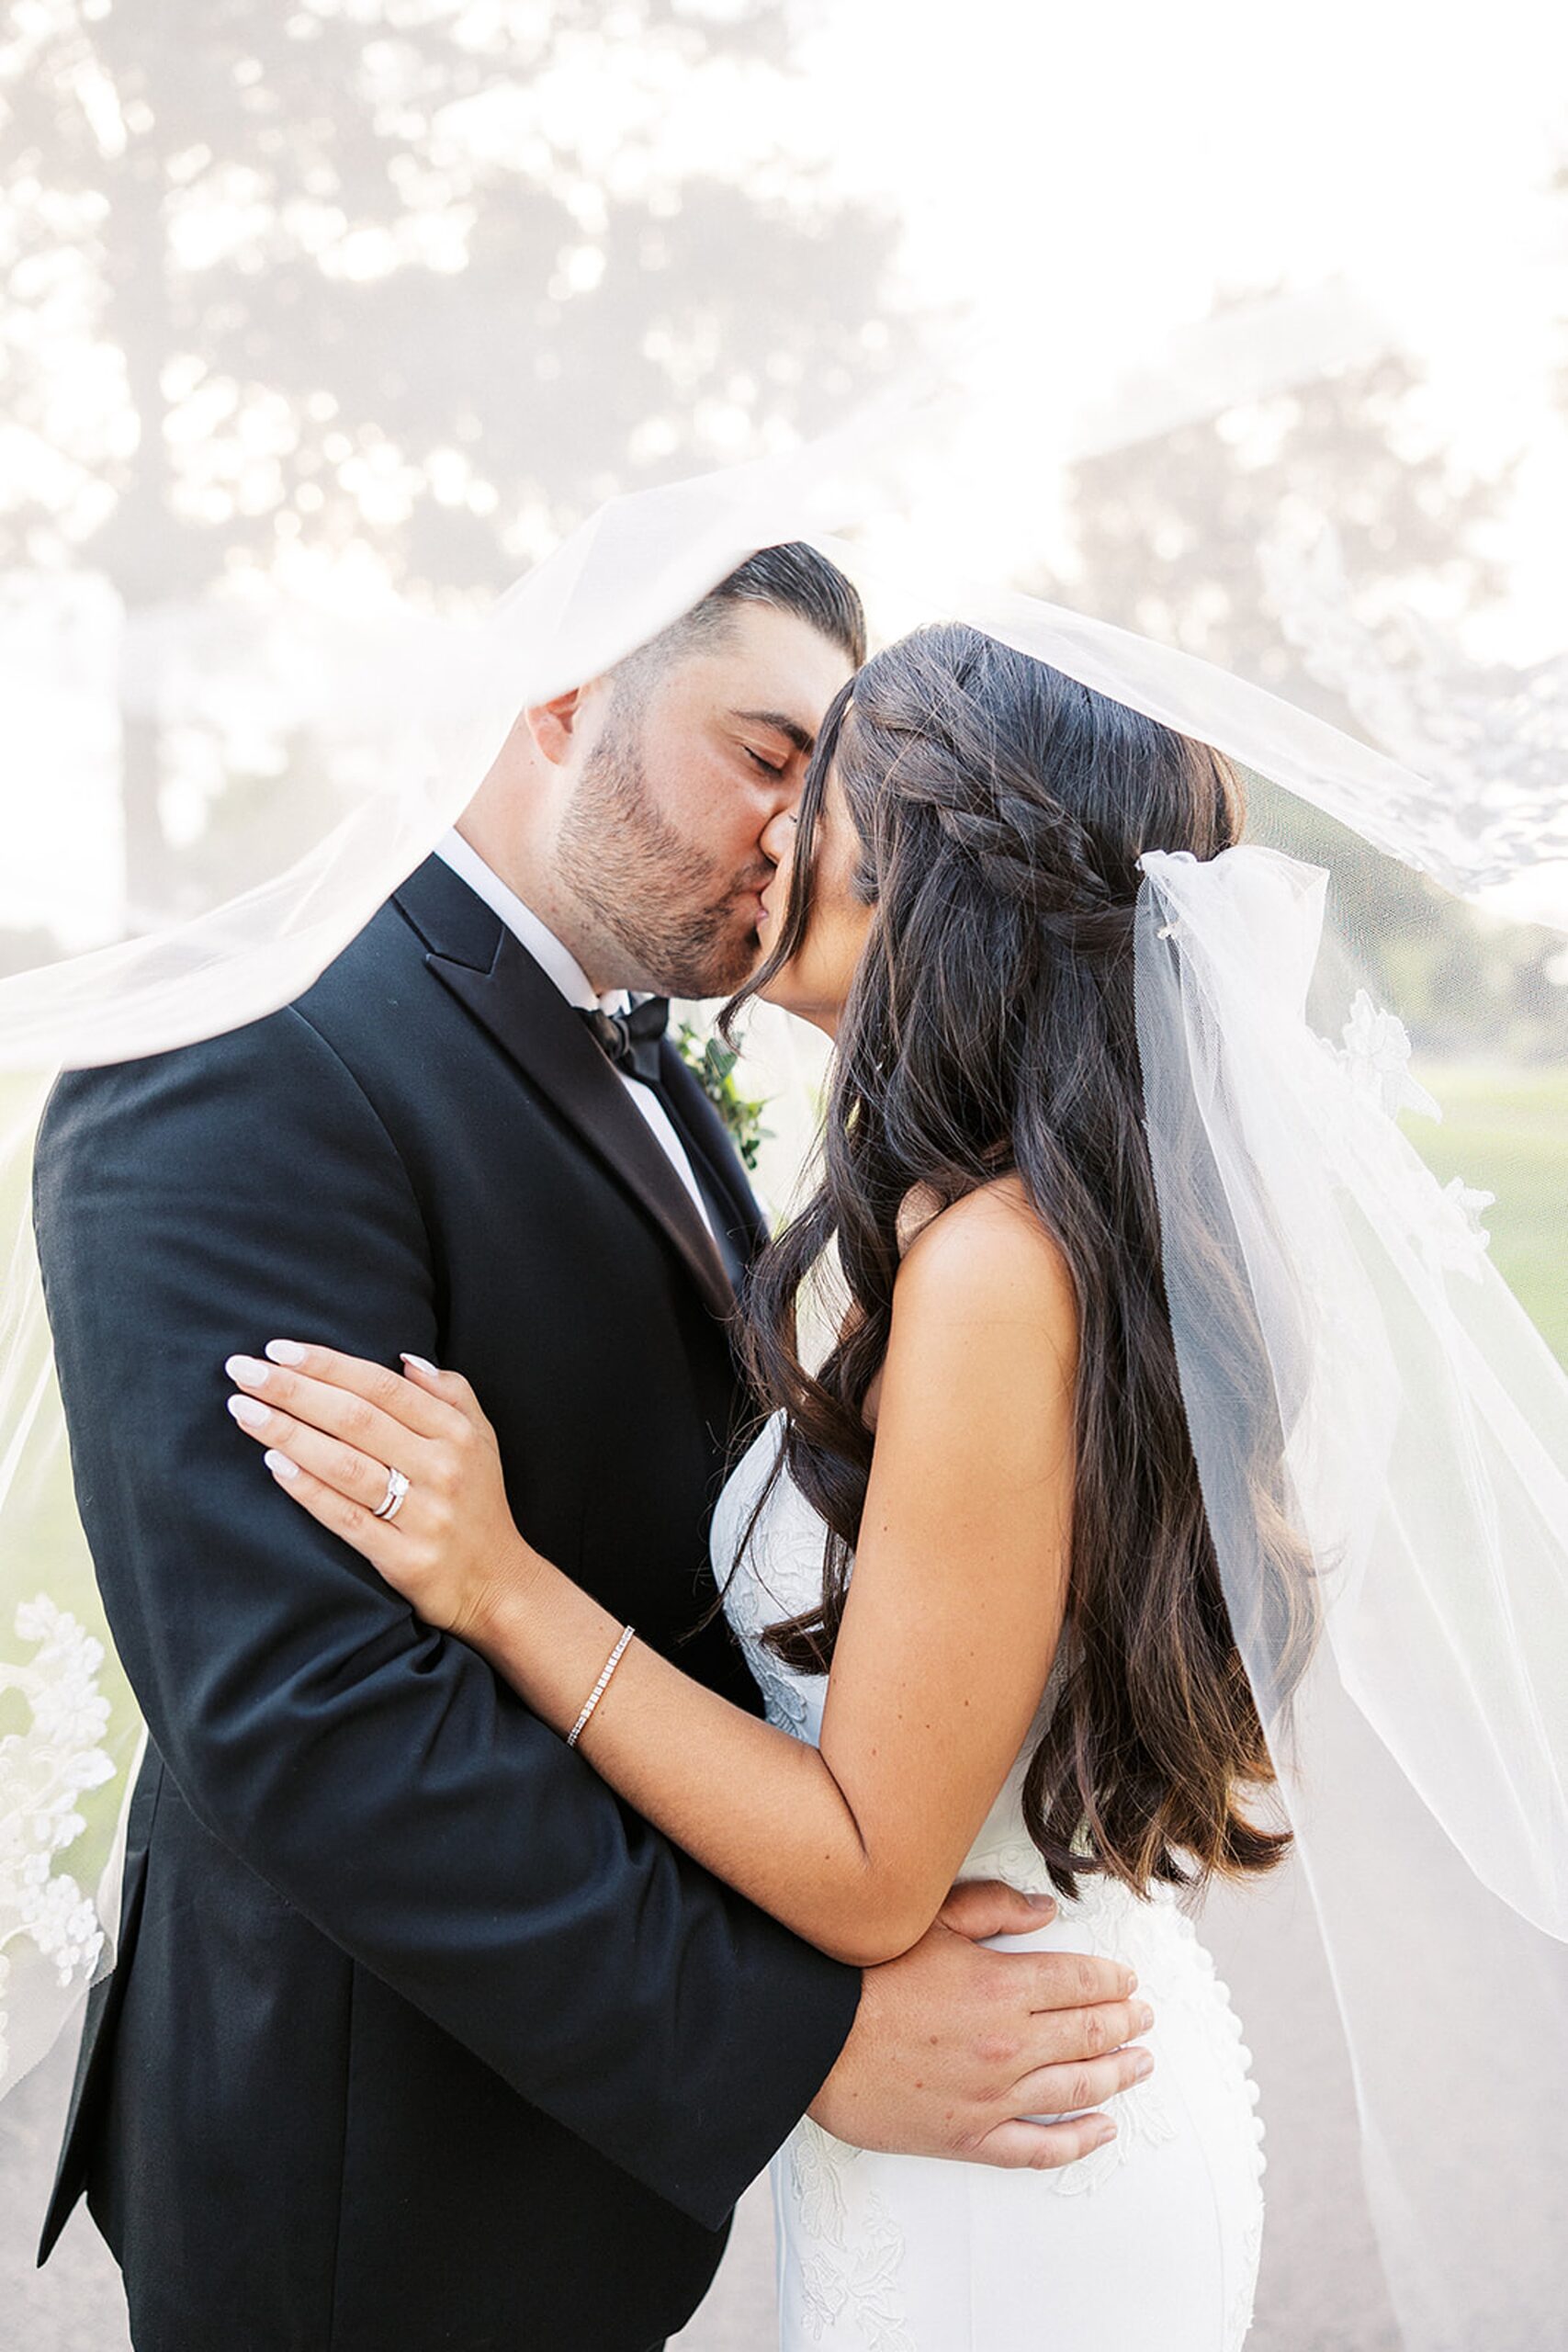 Newlyweds kiss while standing under the long veil